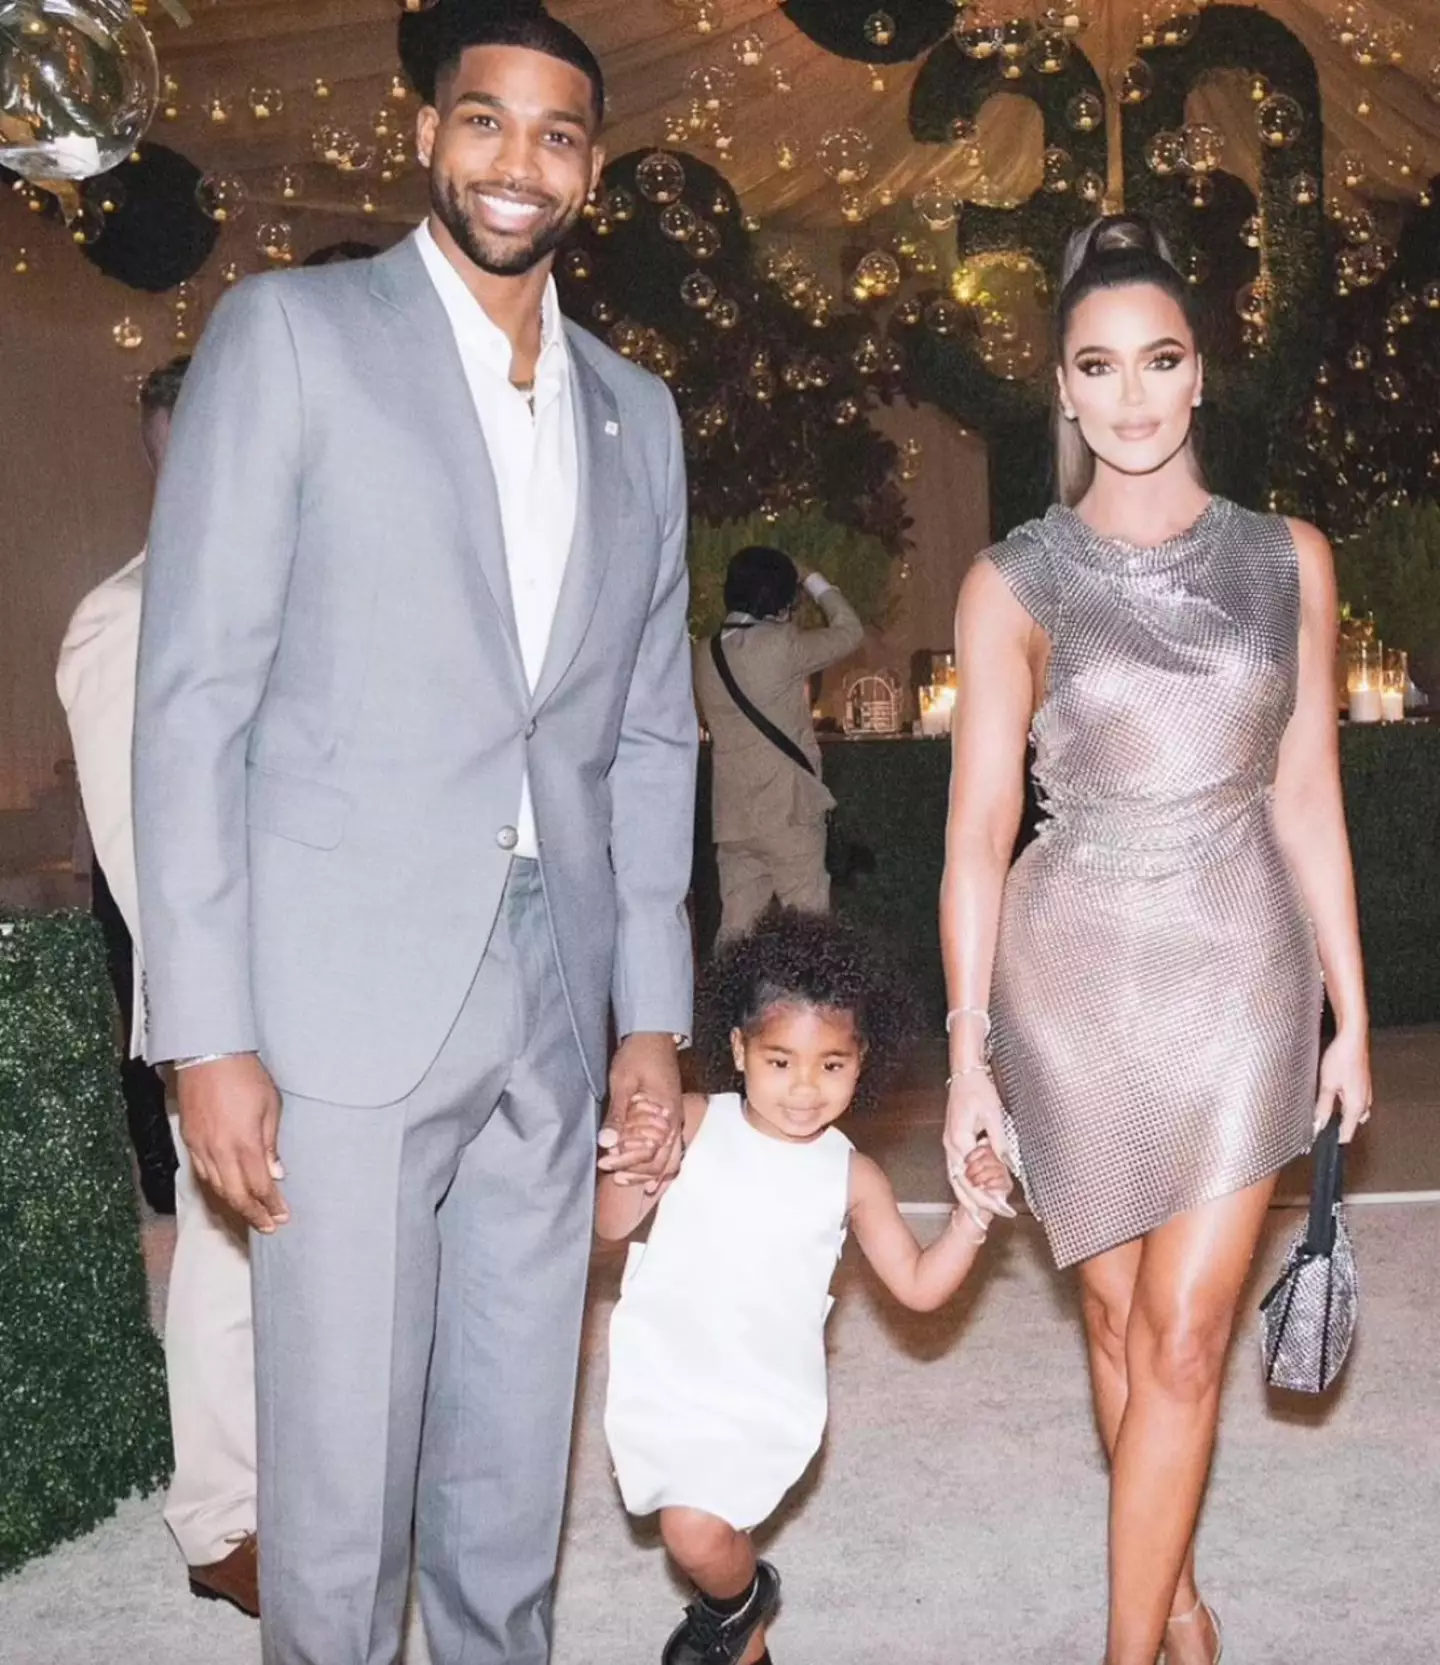 Tristan and Khloe are already parents to four-year-old True. (